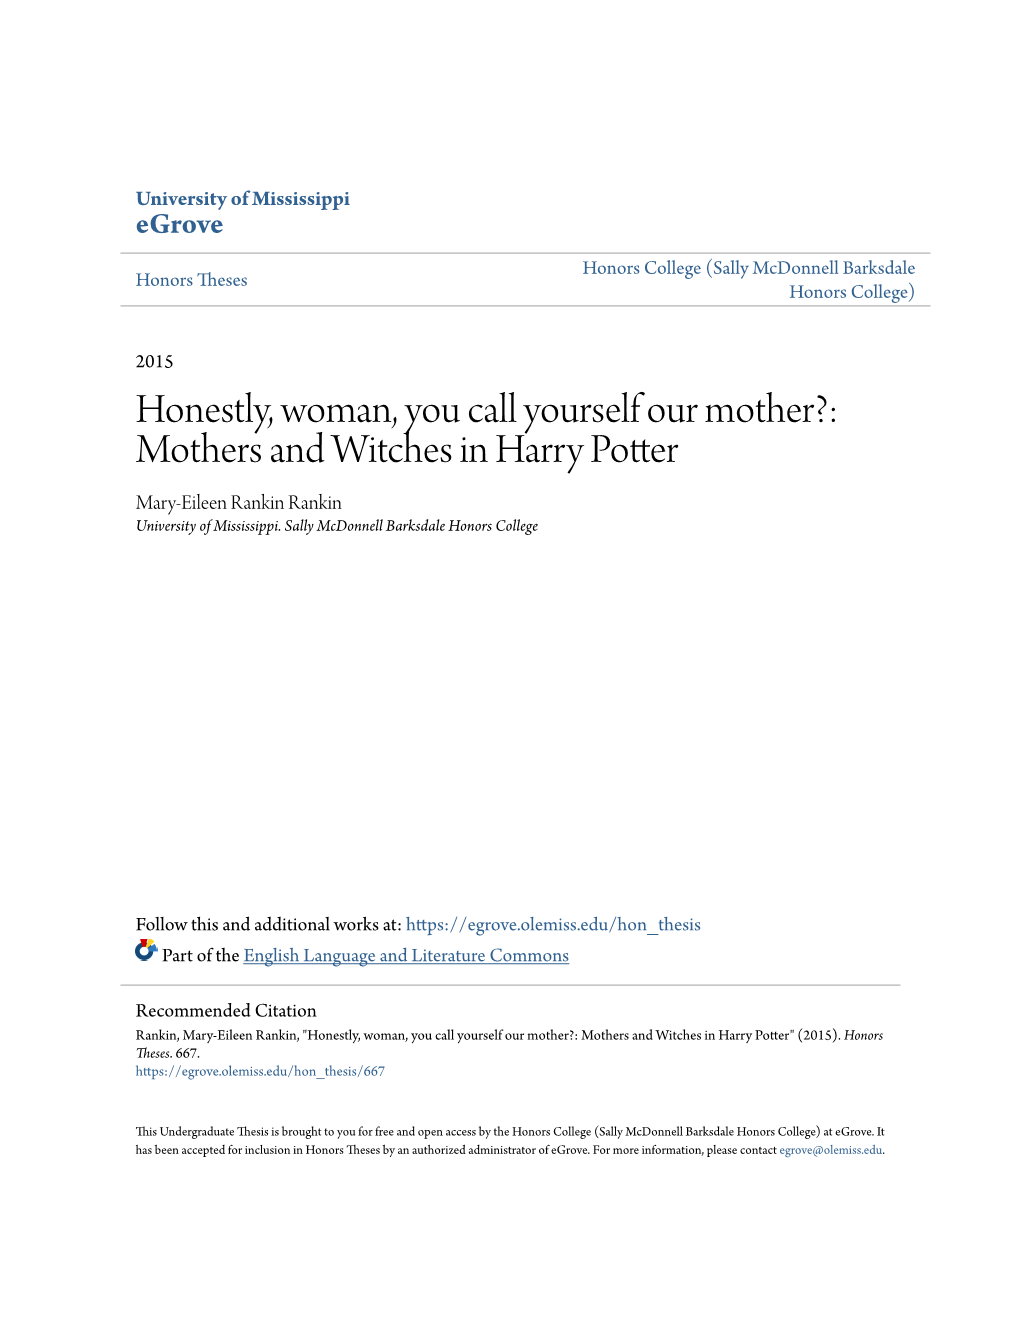 Mothers and Witches in Harry Potter Mary-Eileen Rankin Rankin University of Mississippi